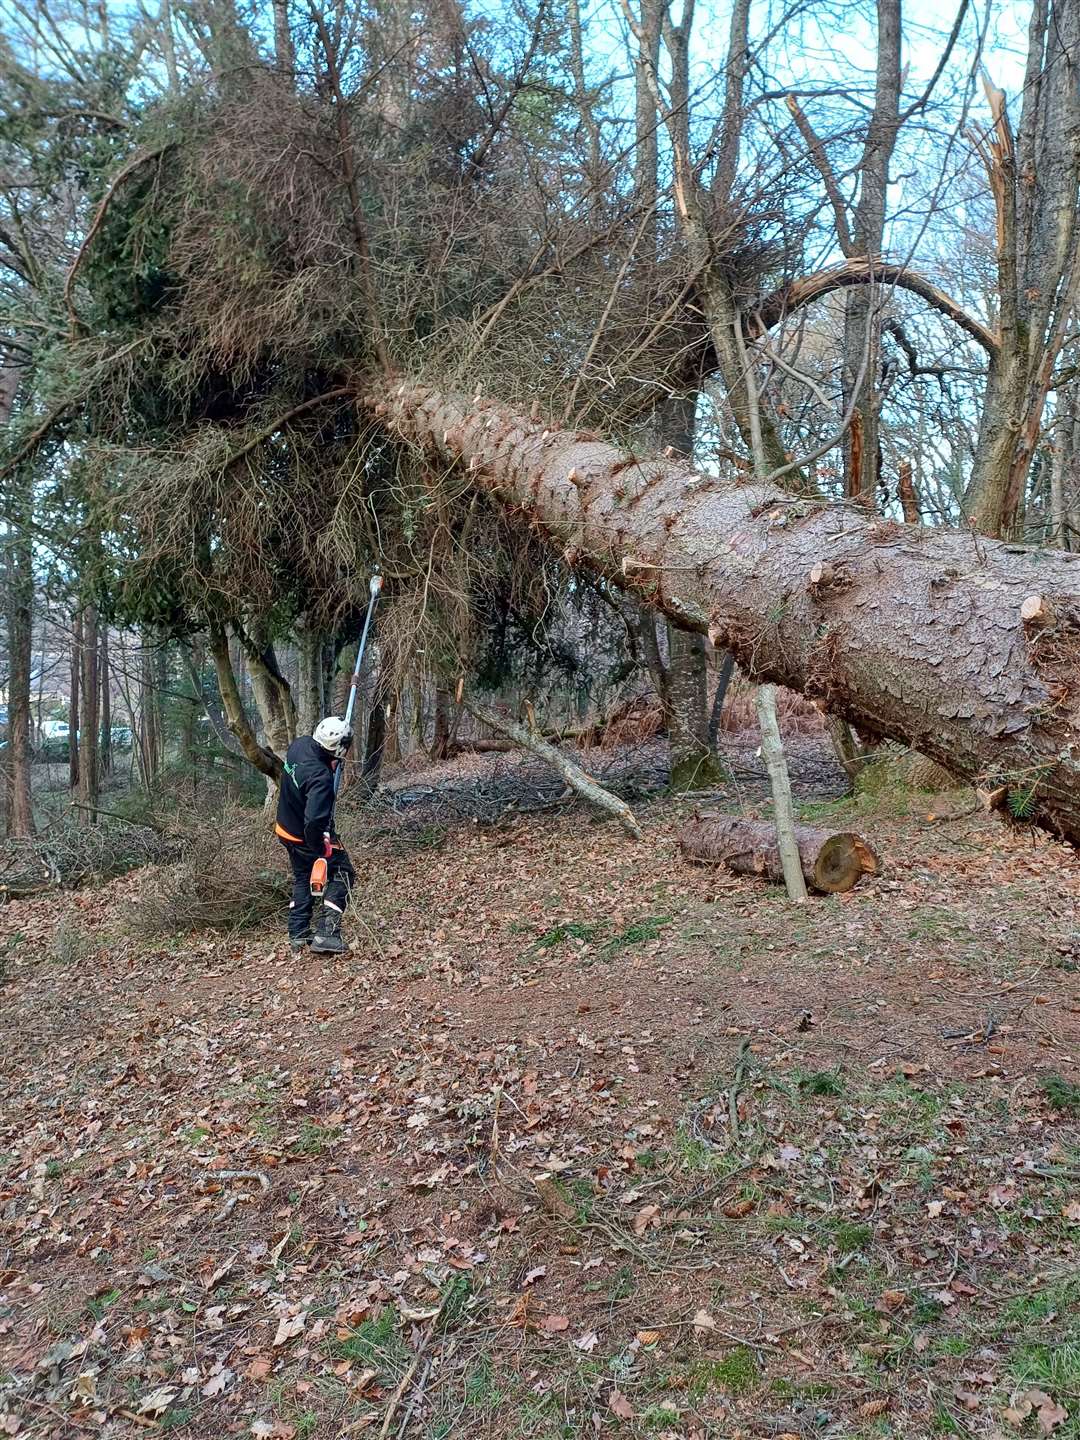 A tree surgeon deals with one of the fallen trees.